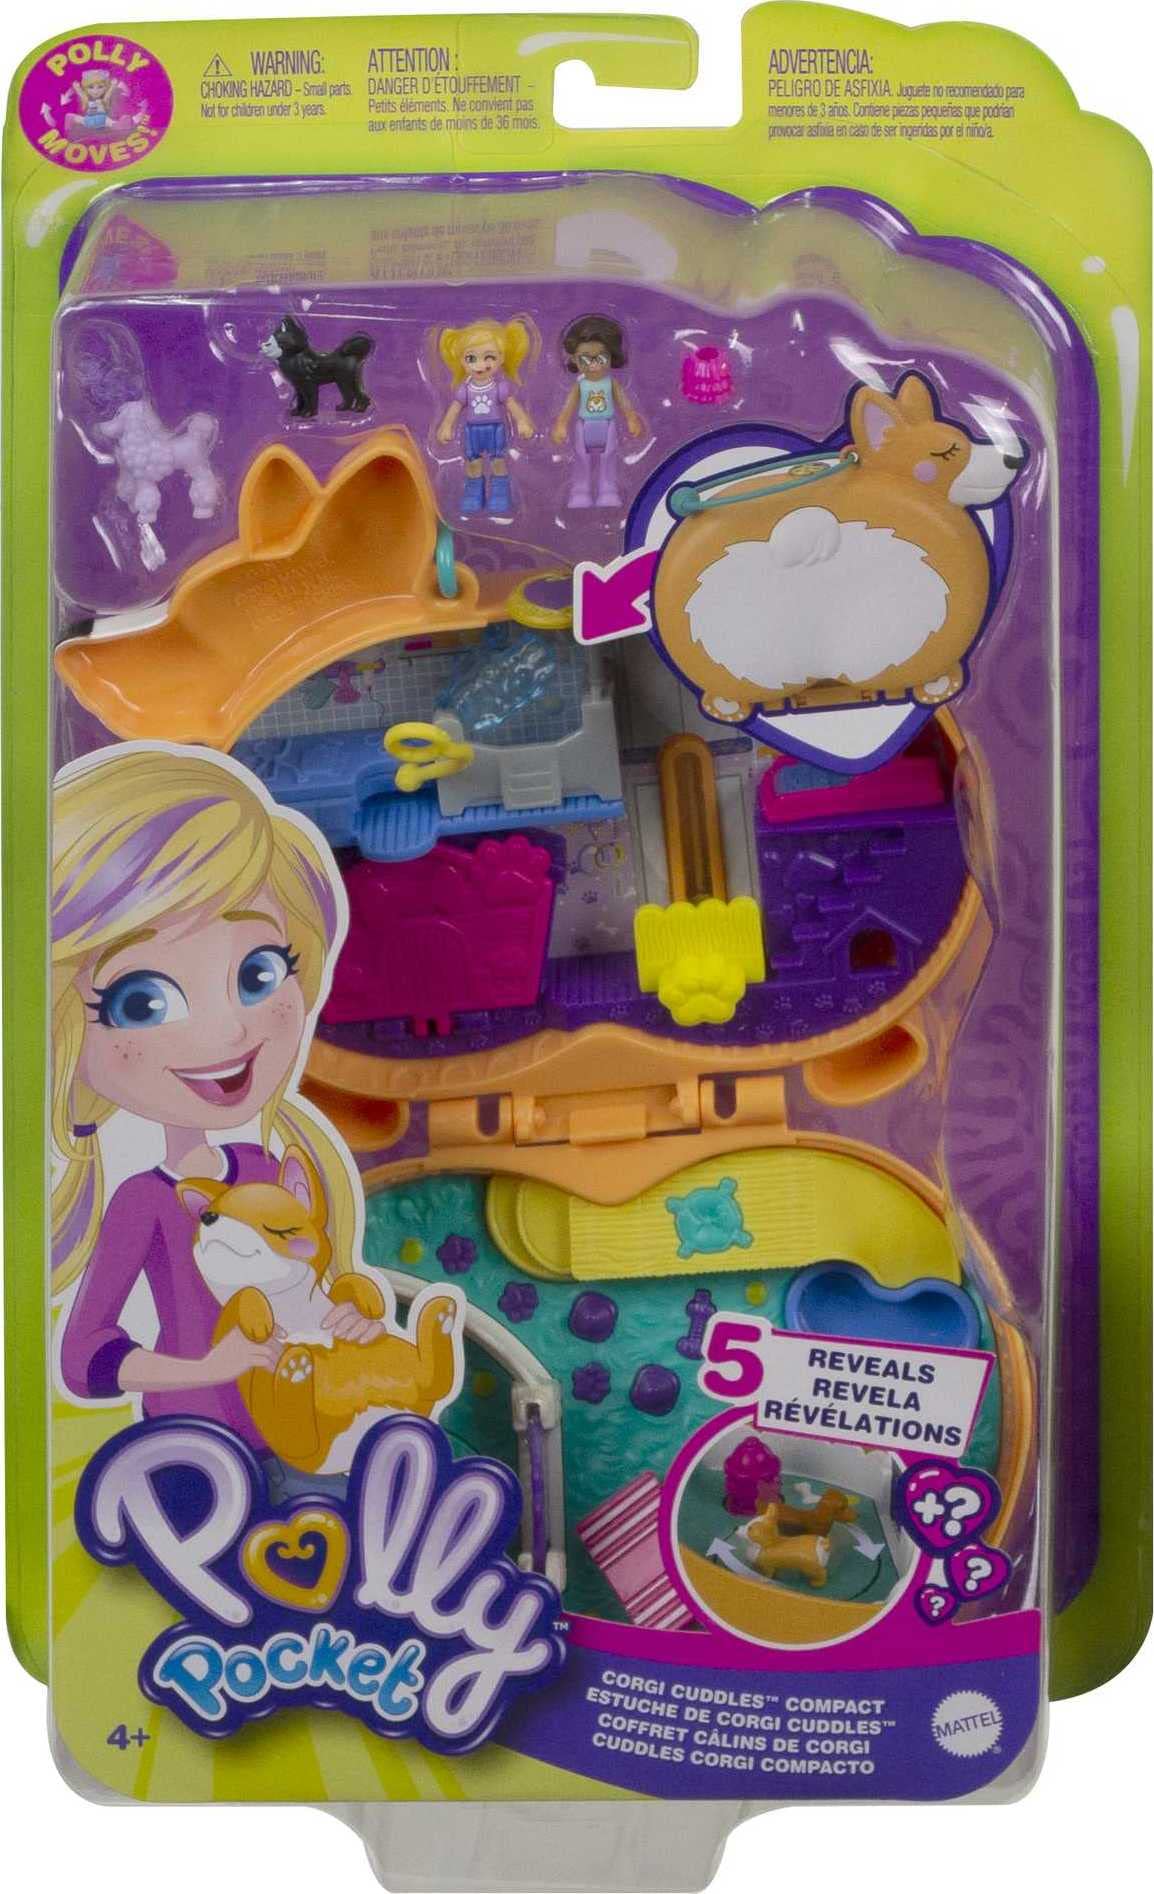 Polly Pocket Compact Playset, Corgi Cuddles with 2 Micro Dolls & Accessories, Travel Toys with Surprise Reveals (Amazon Exclusive)